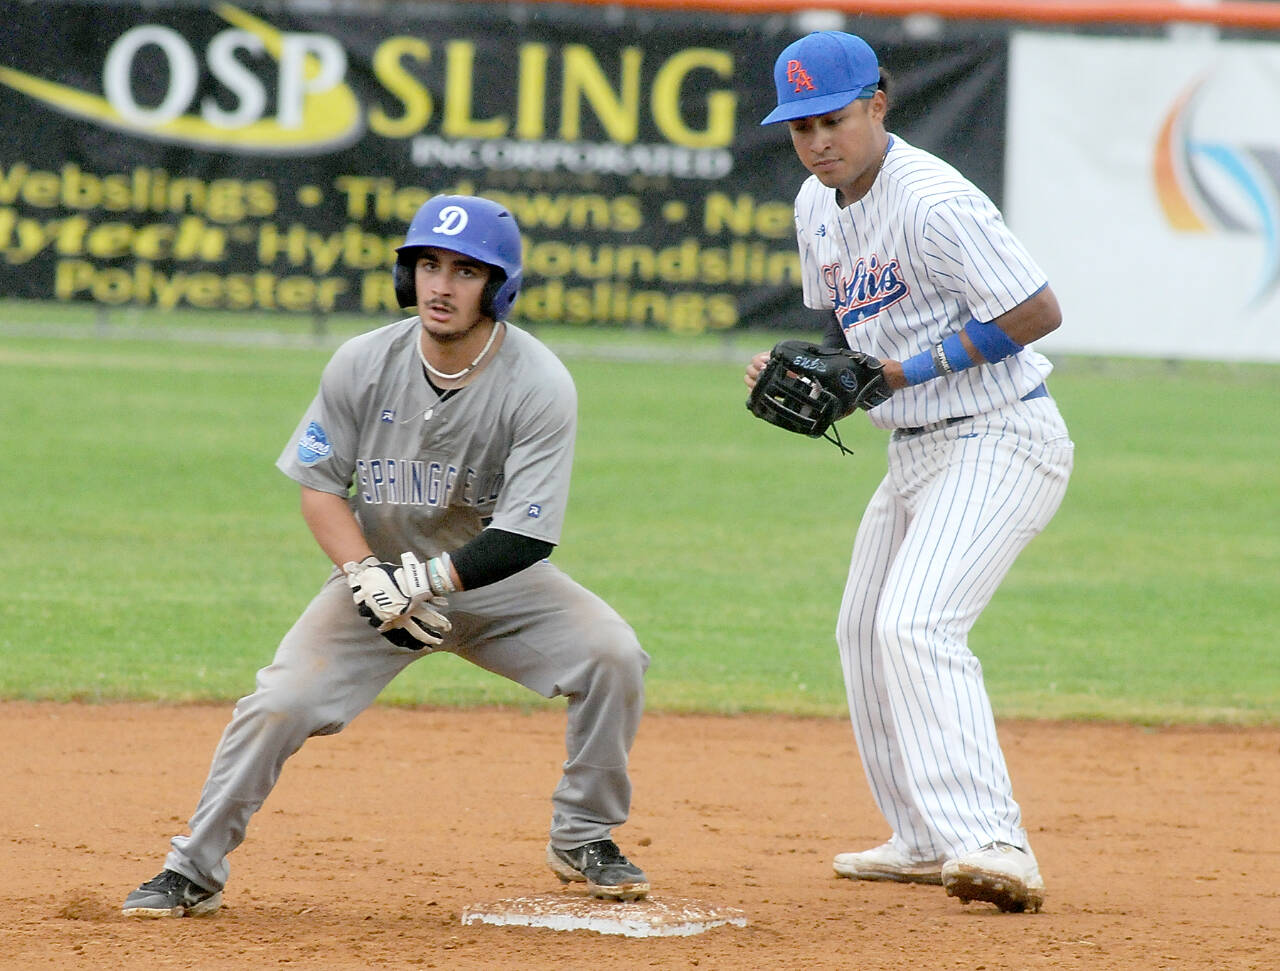 Lefties second baseman Roberto Nunez, right, playing against Springfield early this summer. The Embry-Riddle student and ballplayer is hitting .349 for the Lefties entering play Tuesday night. (Keith Thorpe/Peninsula Daily News)